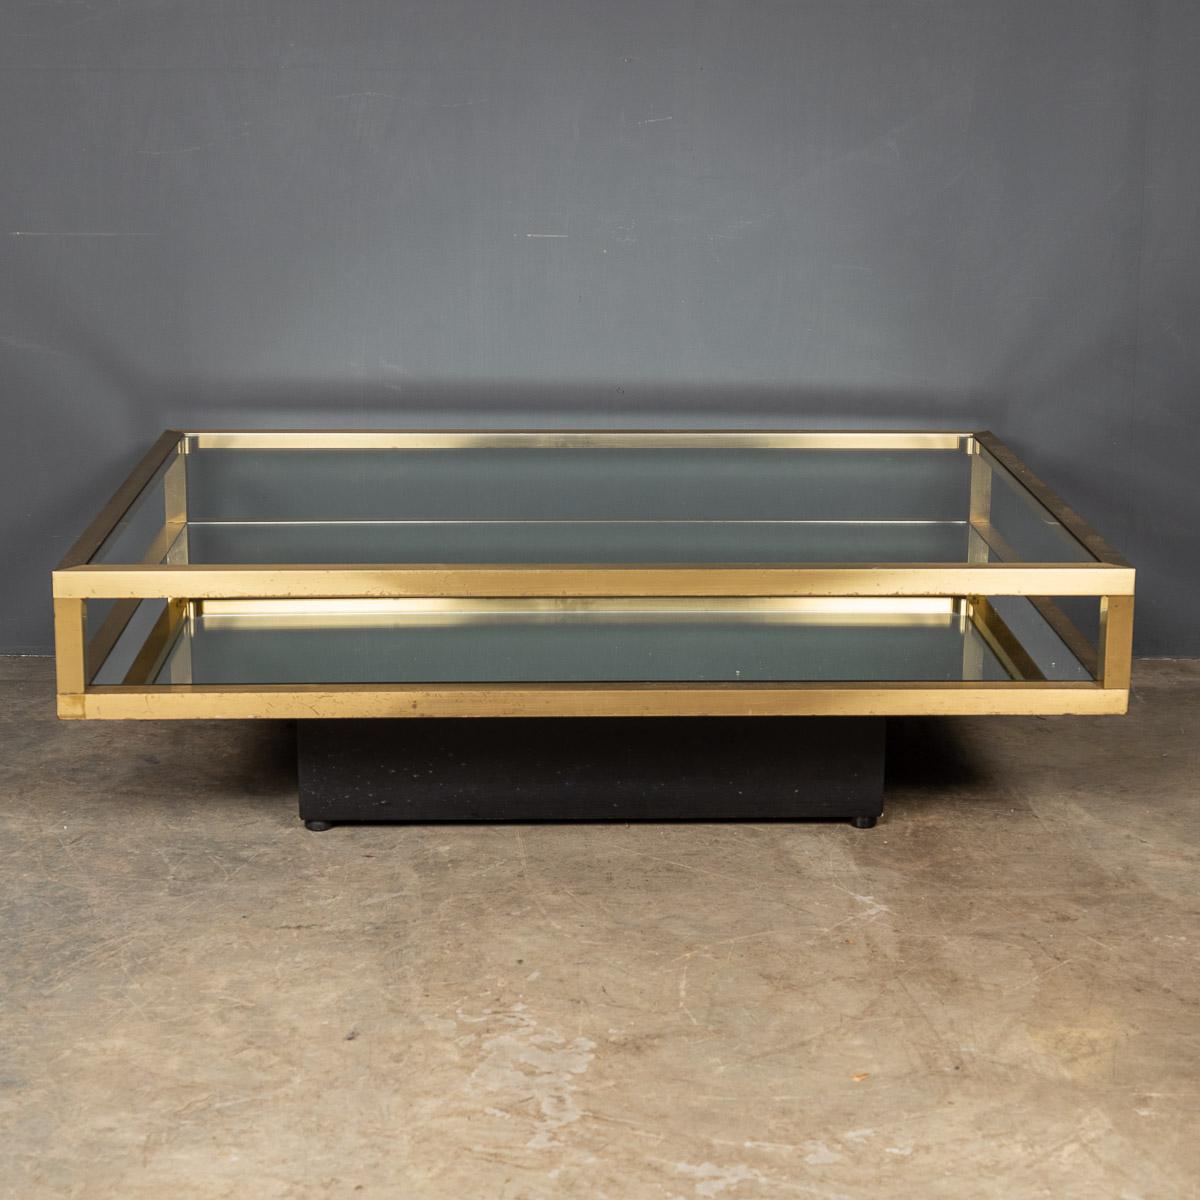 Striking 20th century Italian brass coffee table. This 1970’s vitrine table has a mirrored lower shelf and a clear glass surface with a black plinth.

Condition
In great condition - wear consistent with age.

Size
Width: 80cm
Depth: